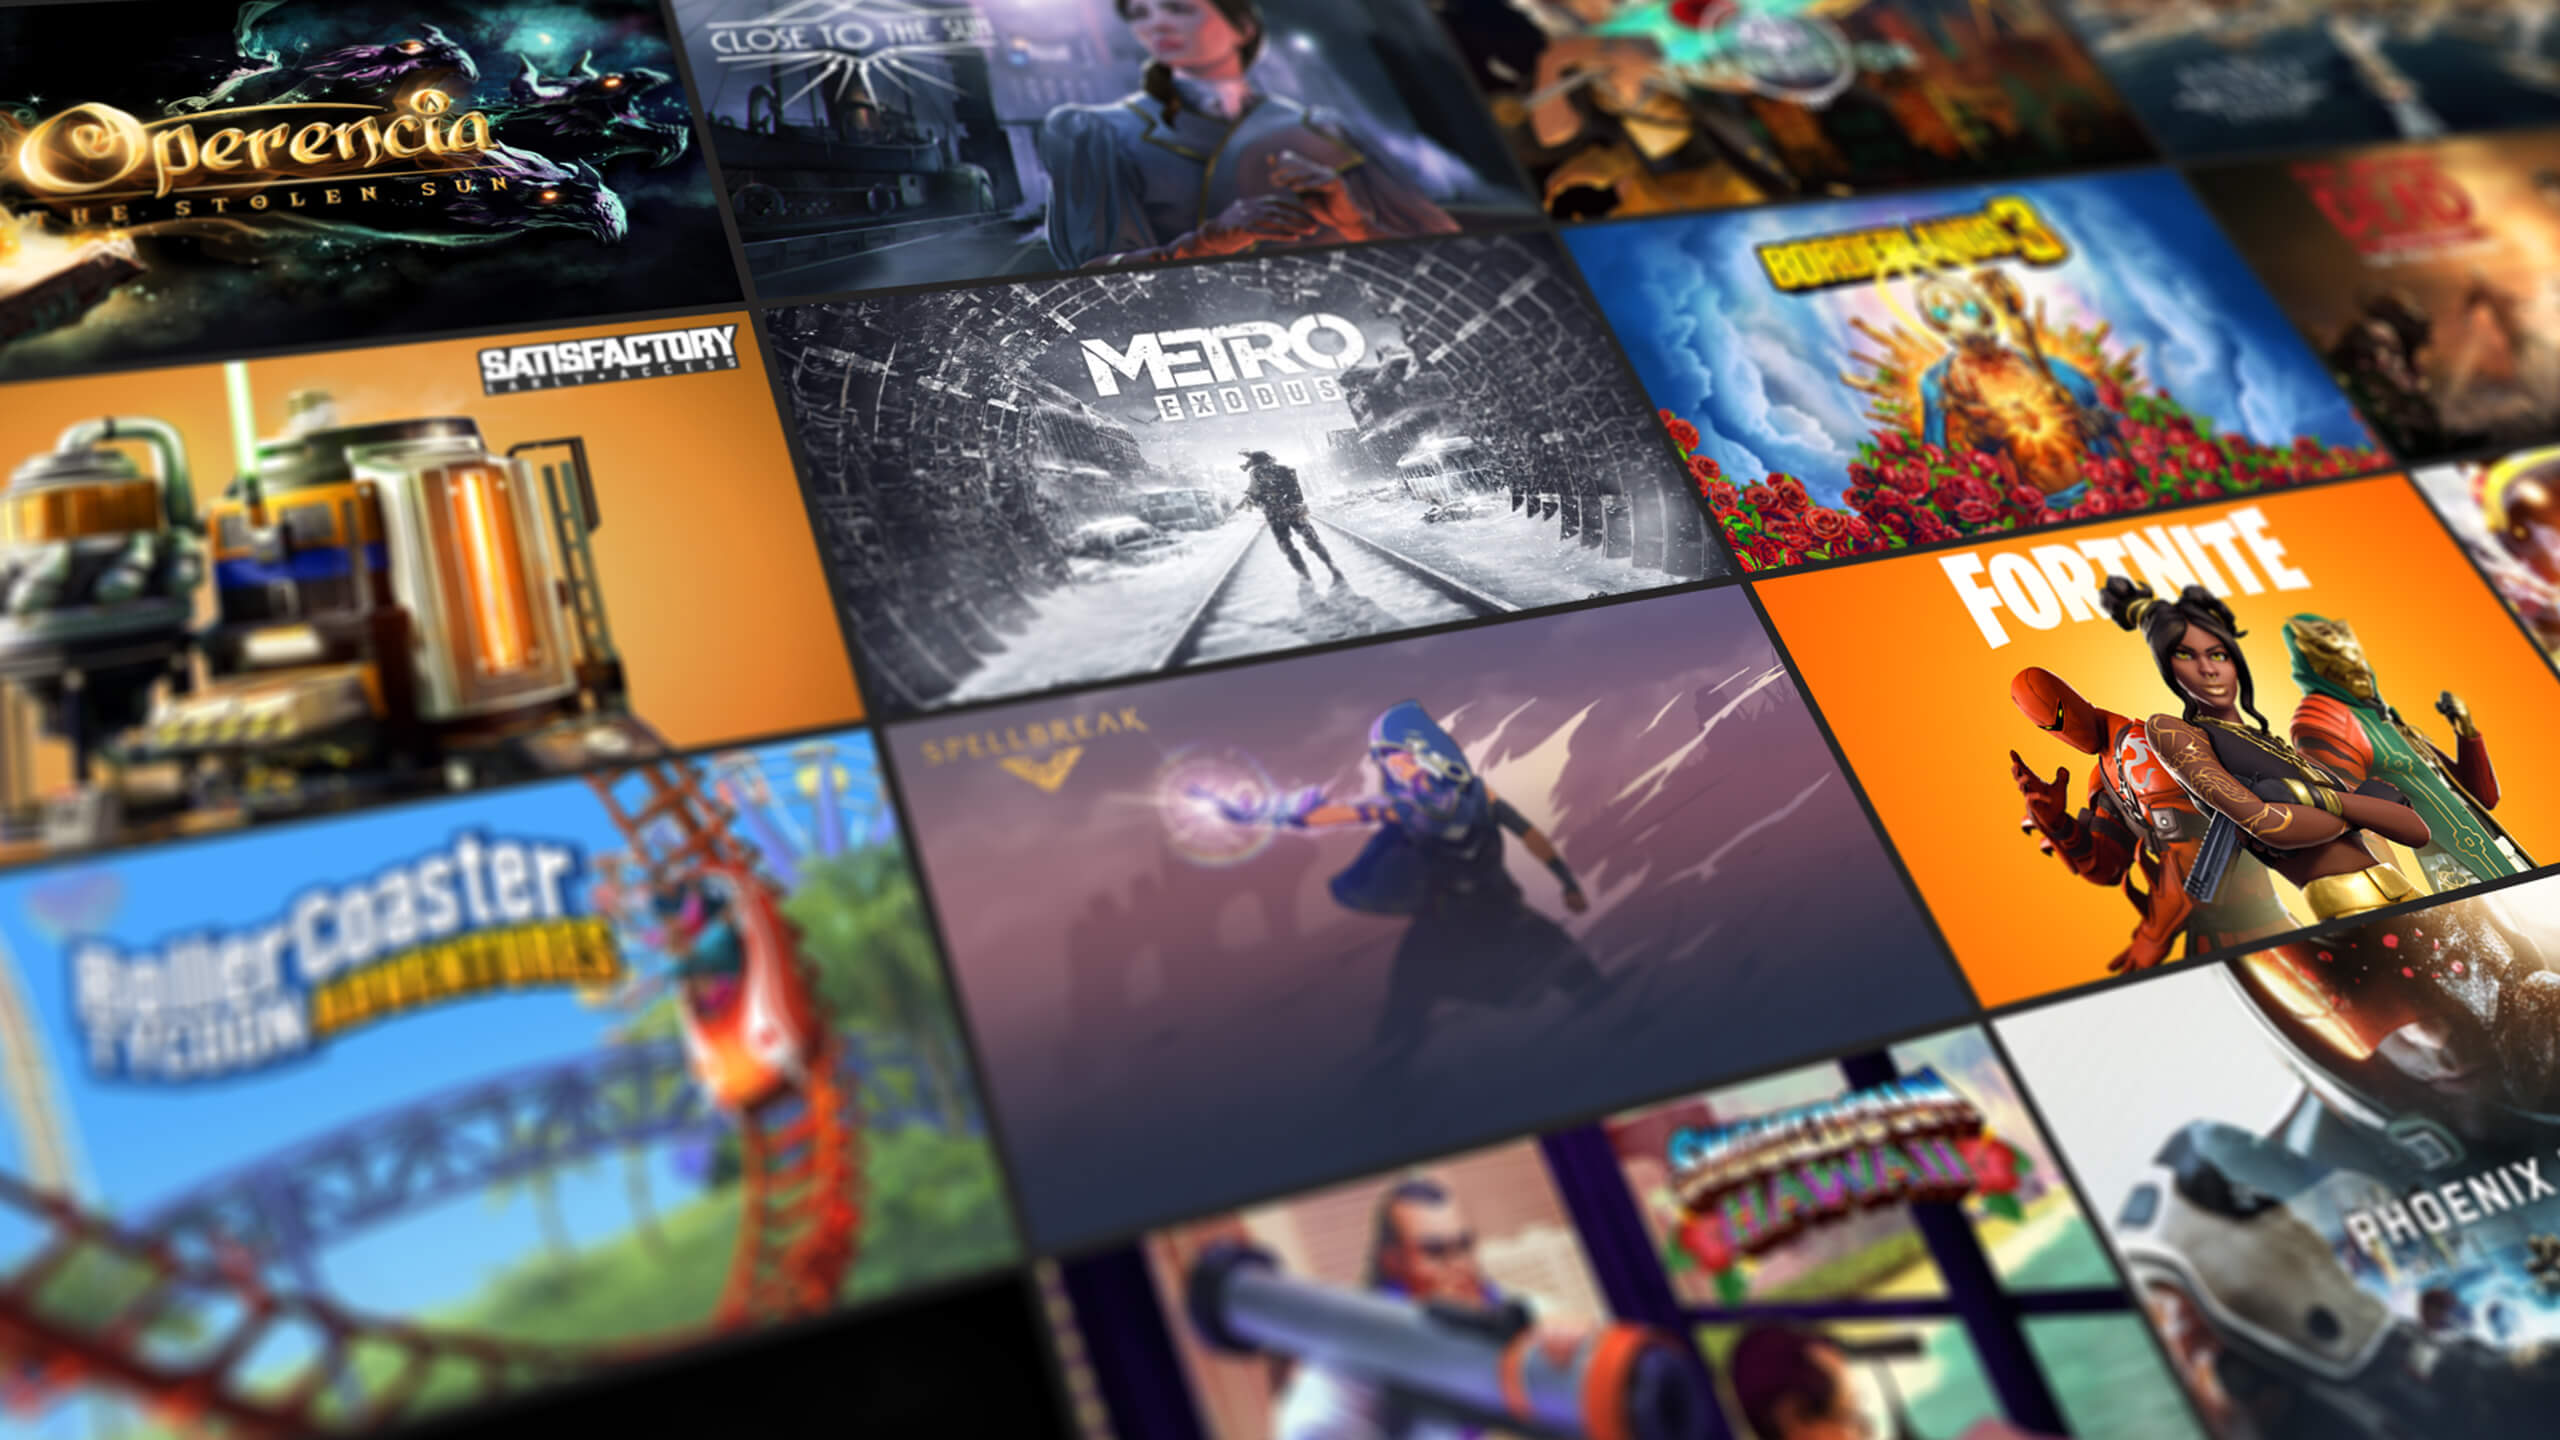 Breakpoint's Quest Pack - Epic Games Store